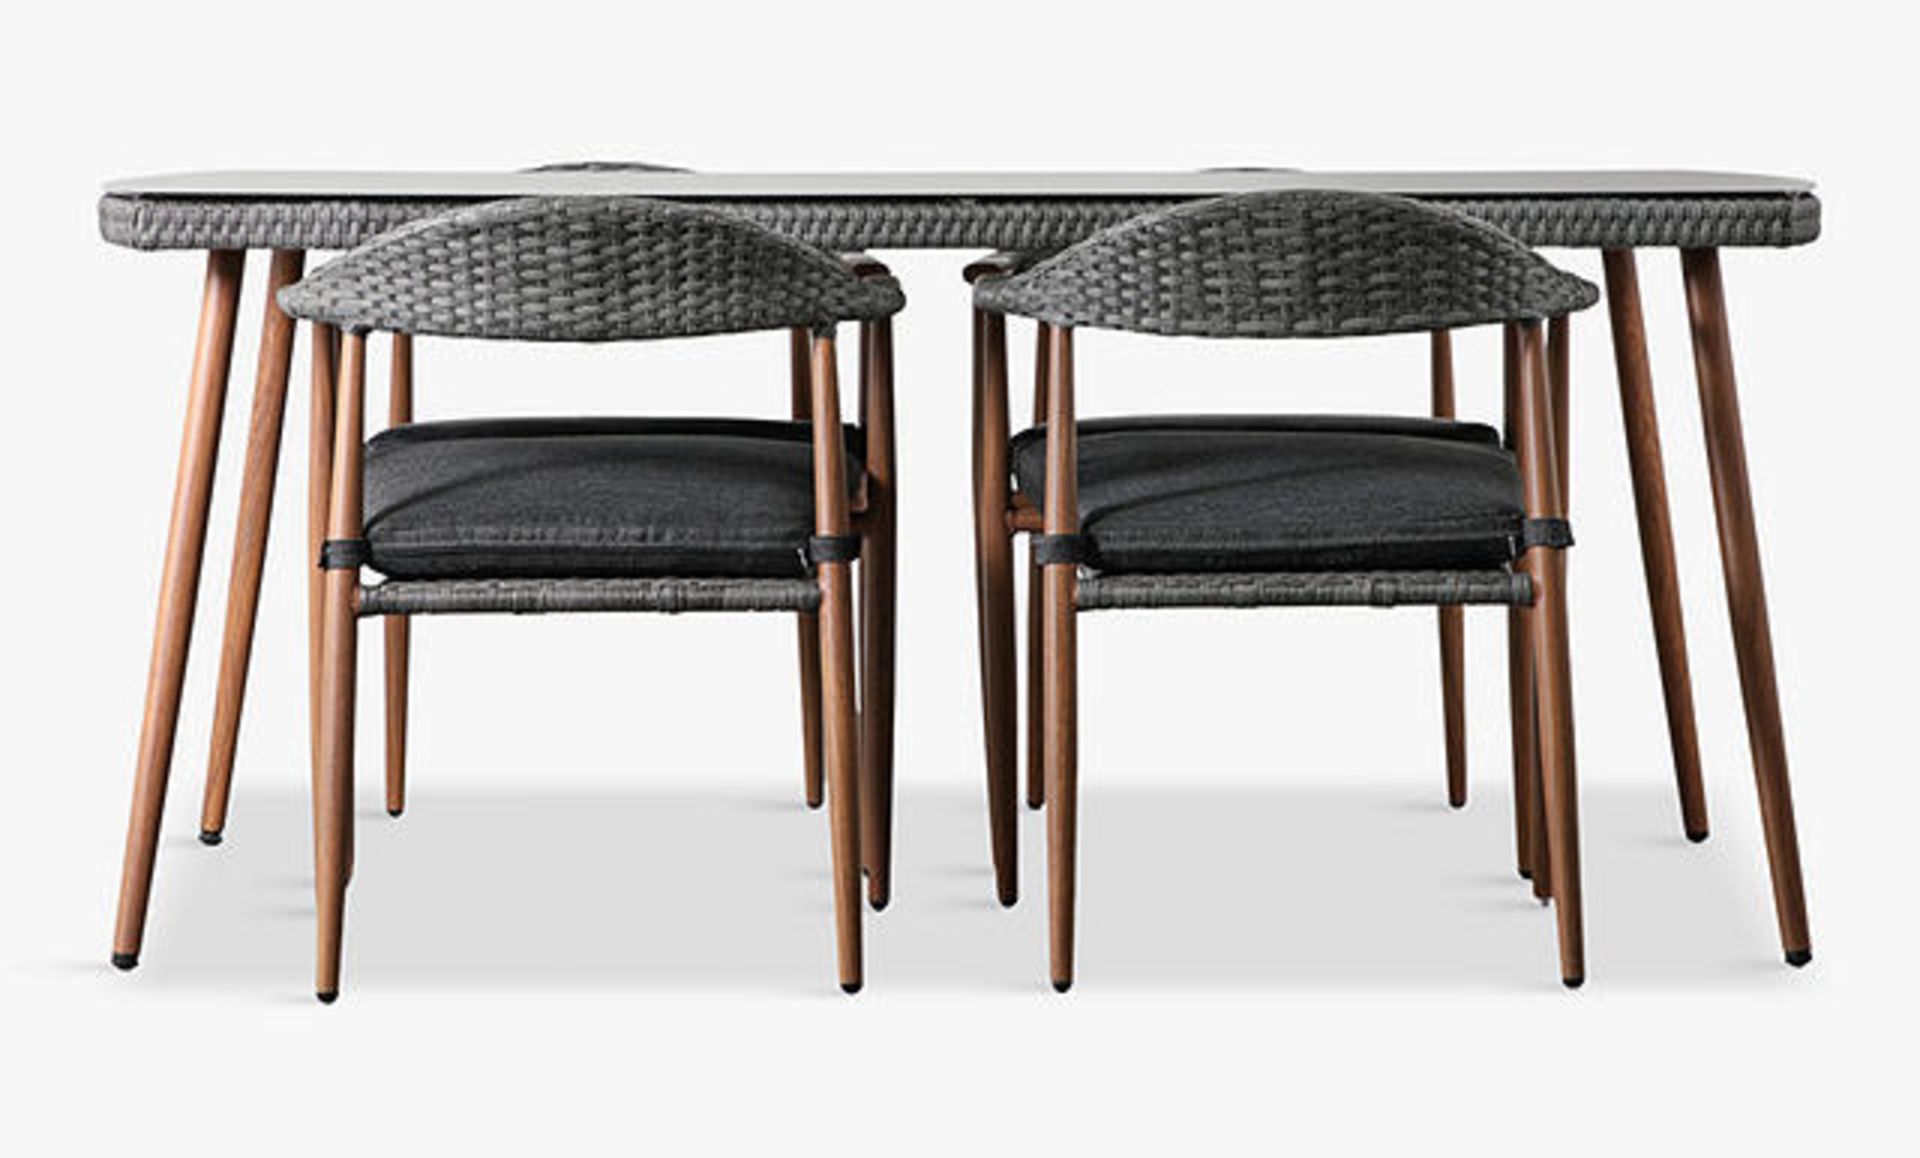 John Lewis Braided 4-Seater Garden Dining Table & Chairs Set, Grey - PRICED £1,170 - Image 3 of 3